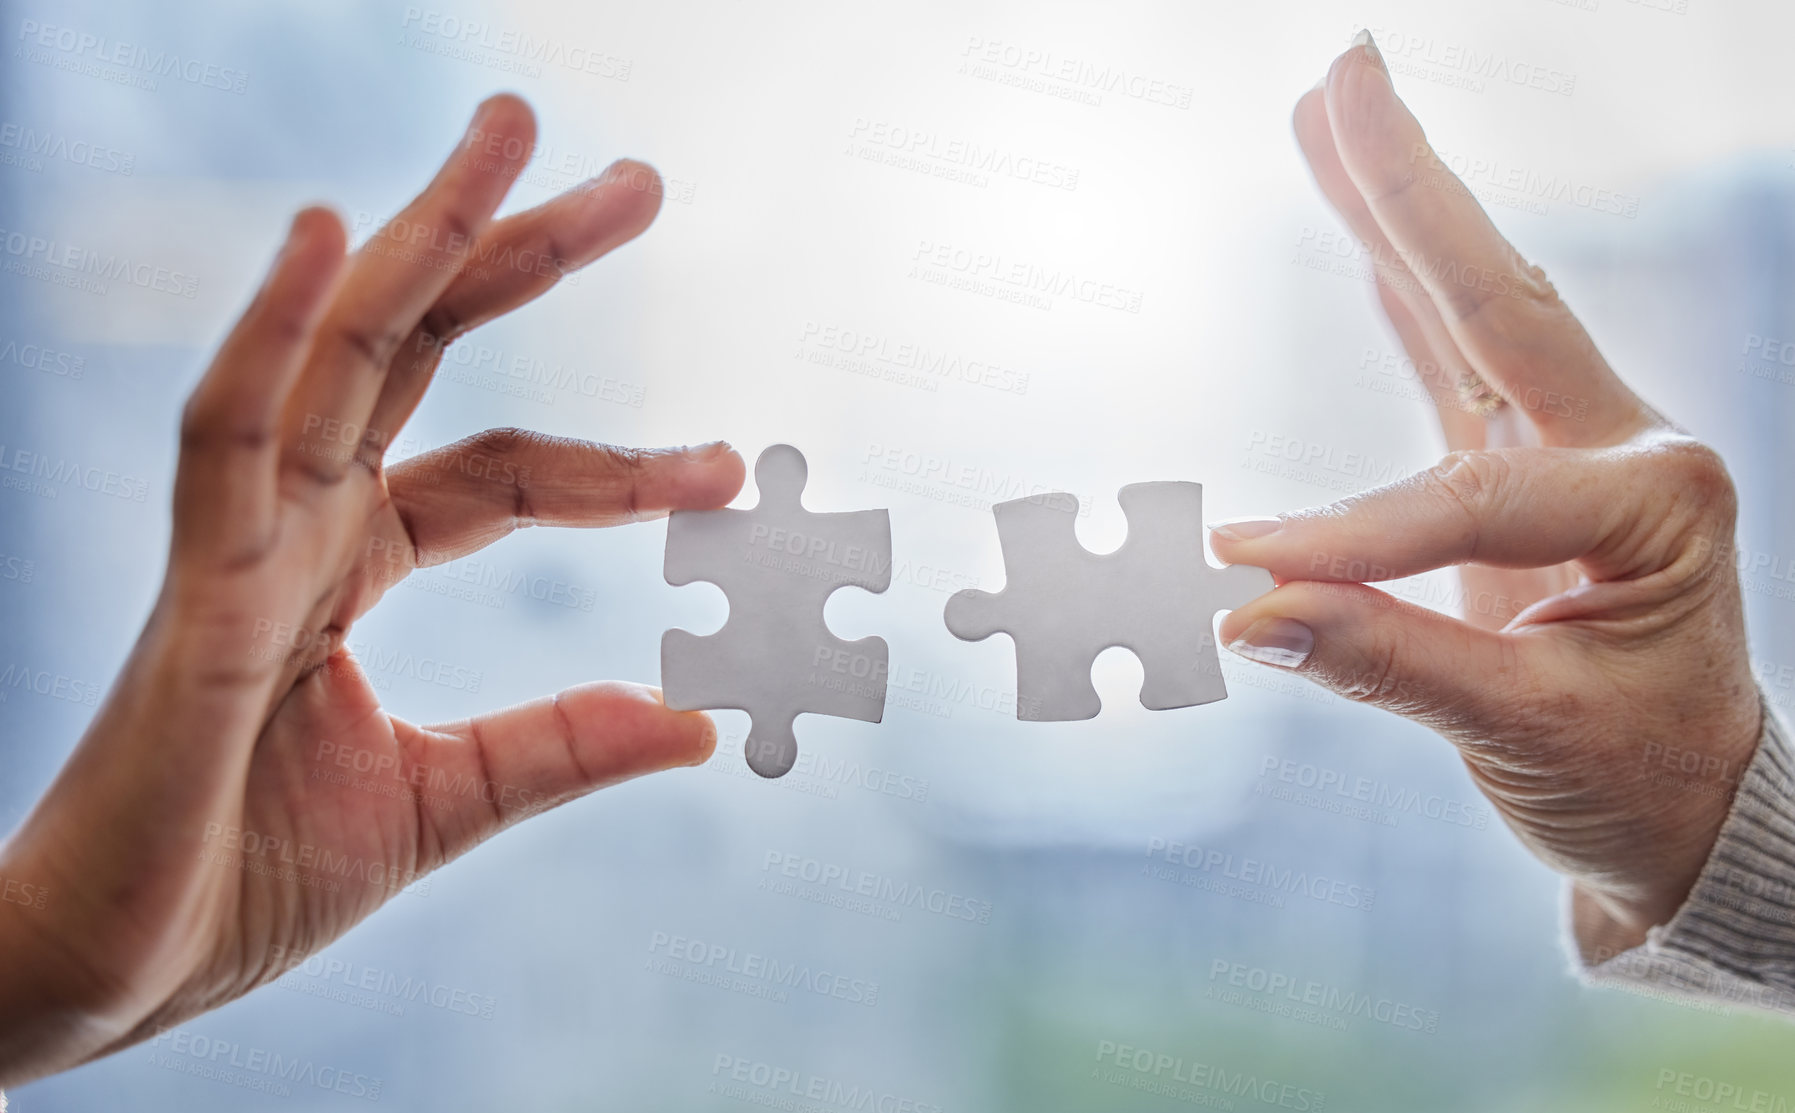 Buy stock photo Shot of two people joining puzzle pieces together